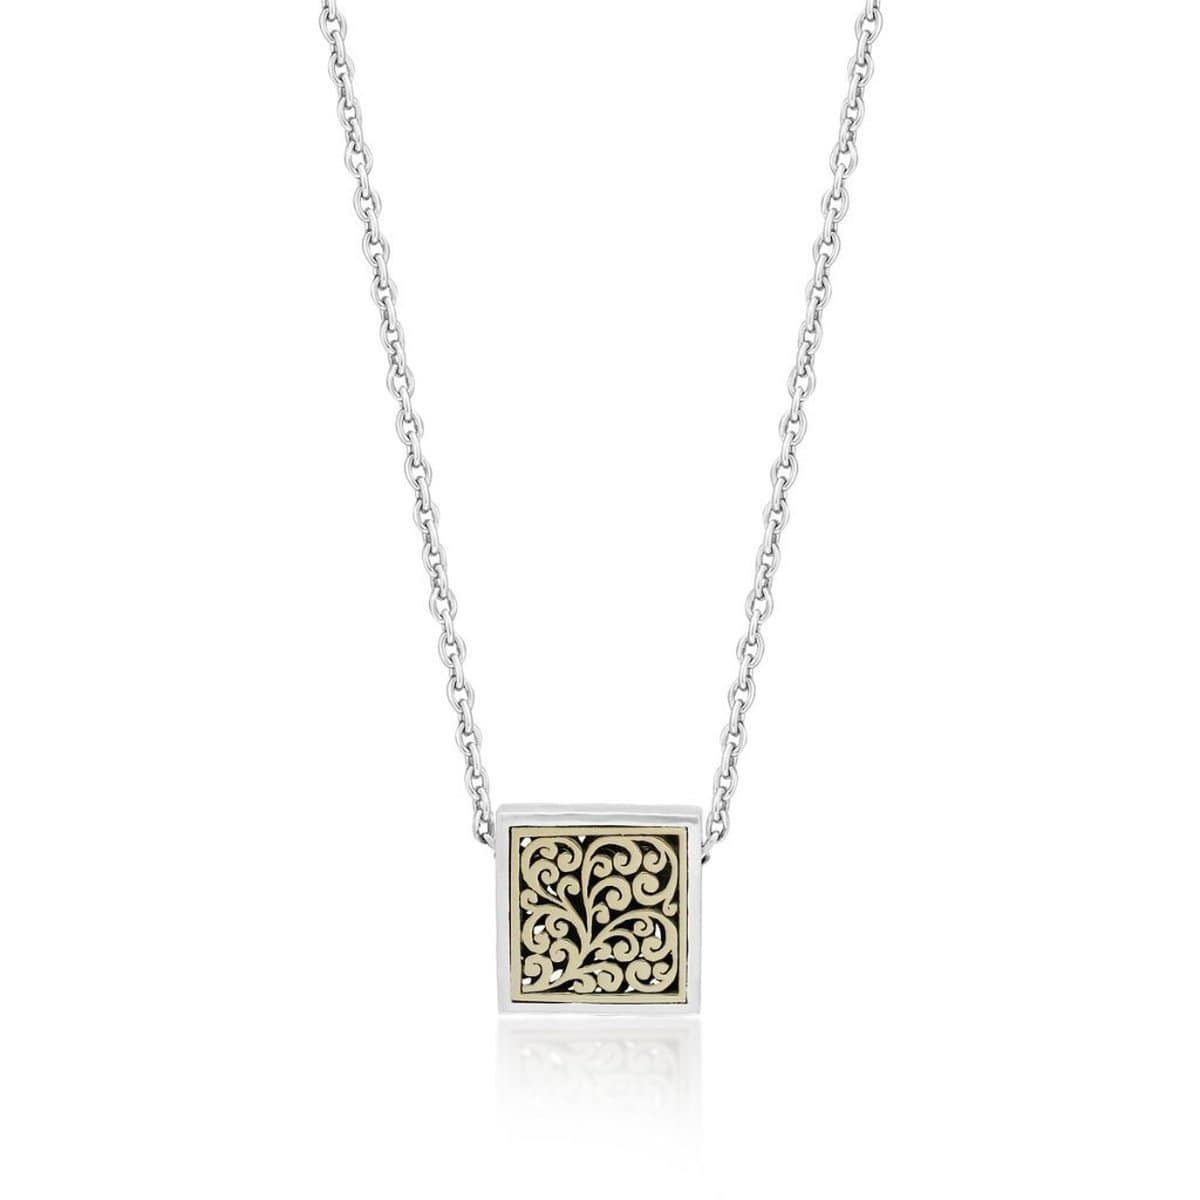 18K Yellow Gold Sterling Silver Square Block Pendant Necklace -  GNU6969-16Y46